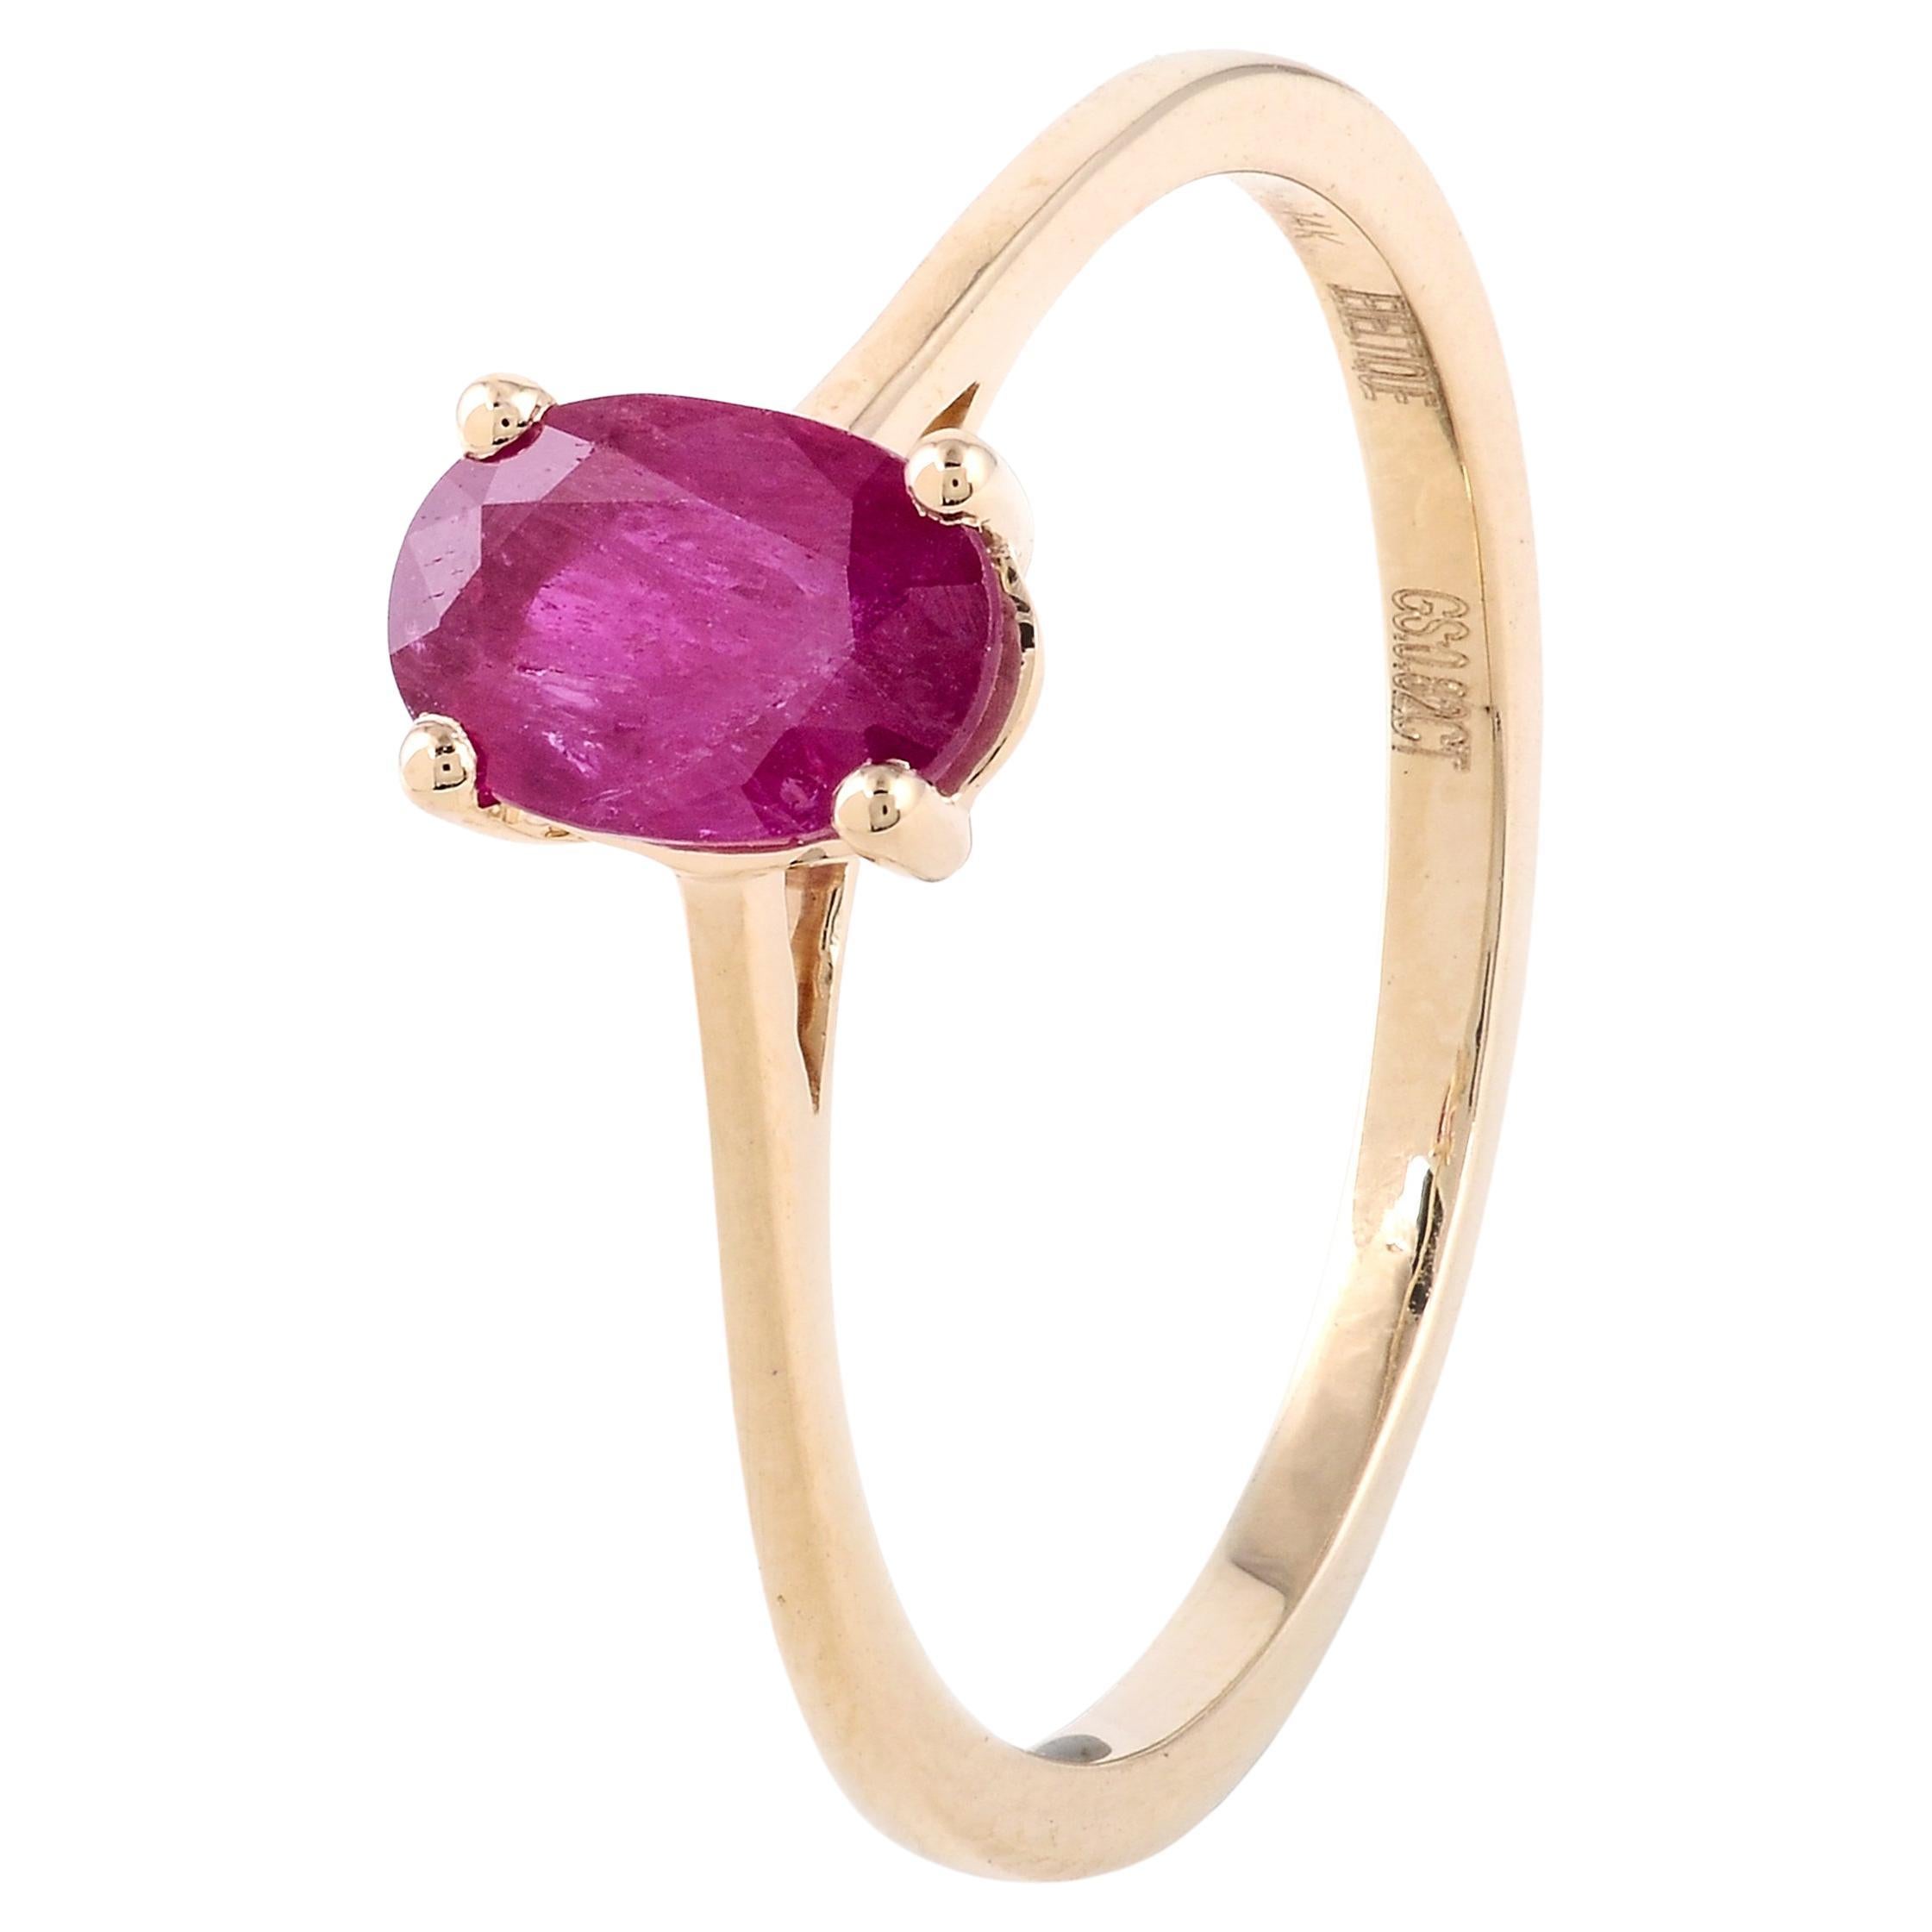 Elegant 14K Ruby Cocktail Ring, Size 6.75 - Luxury Statement Jewelry Piece For Sale